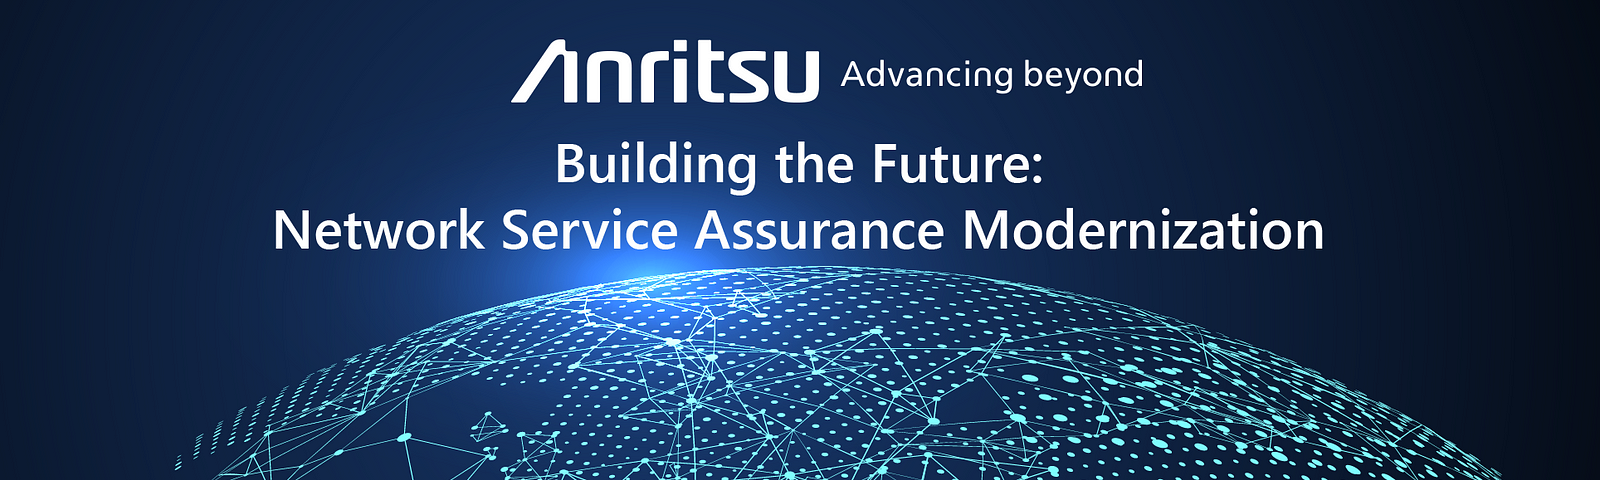 Plan for the future with network service assurance